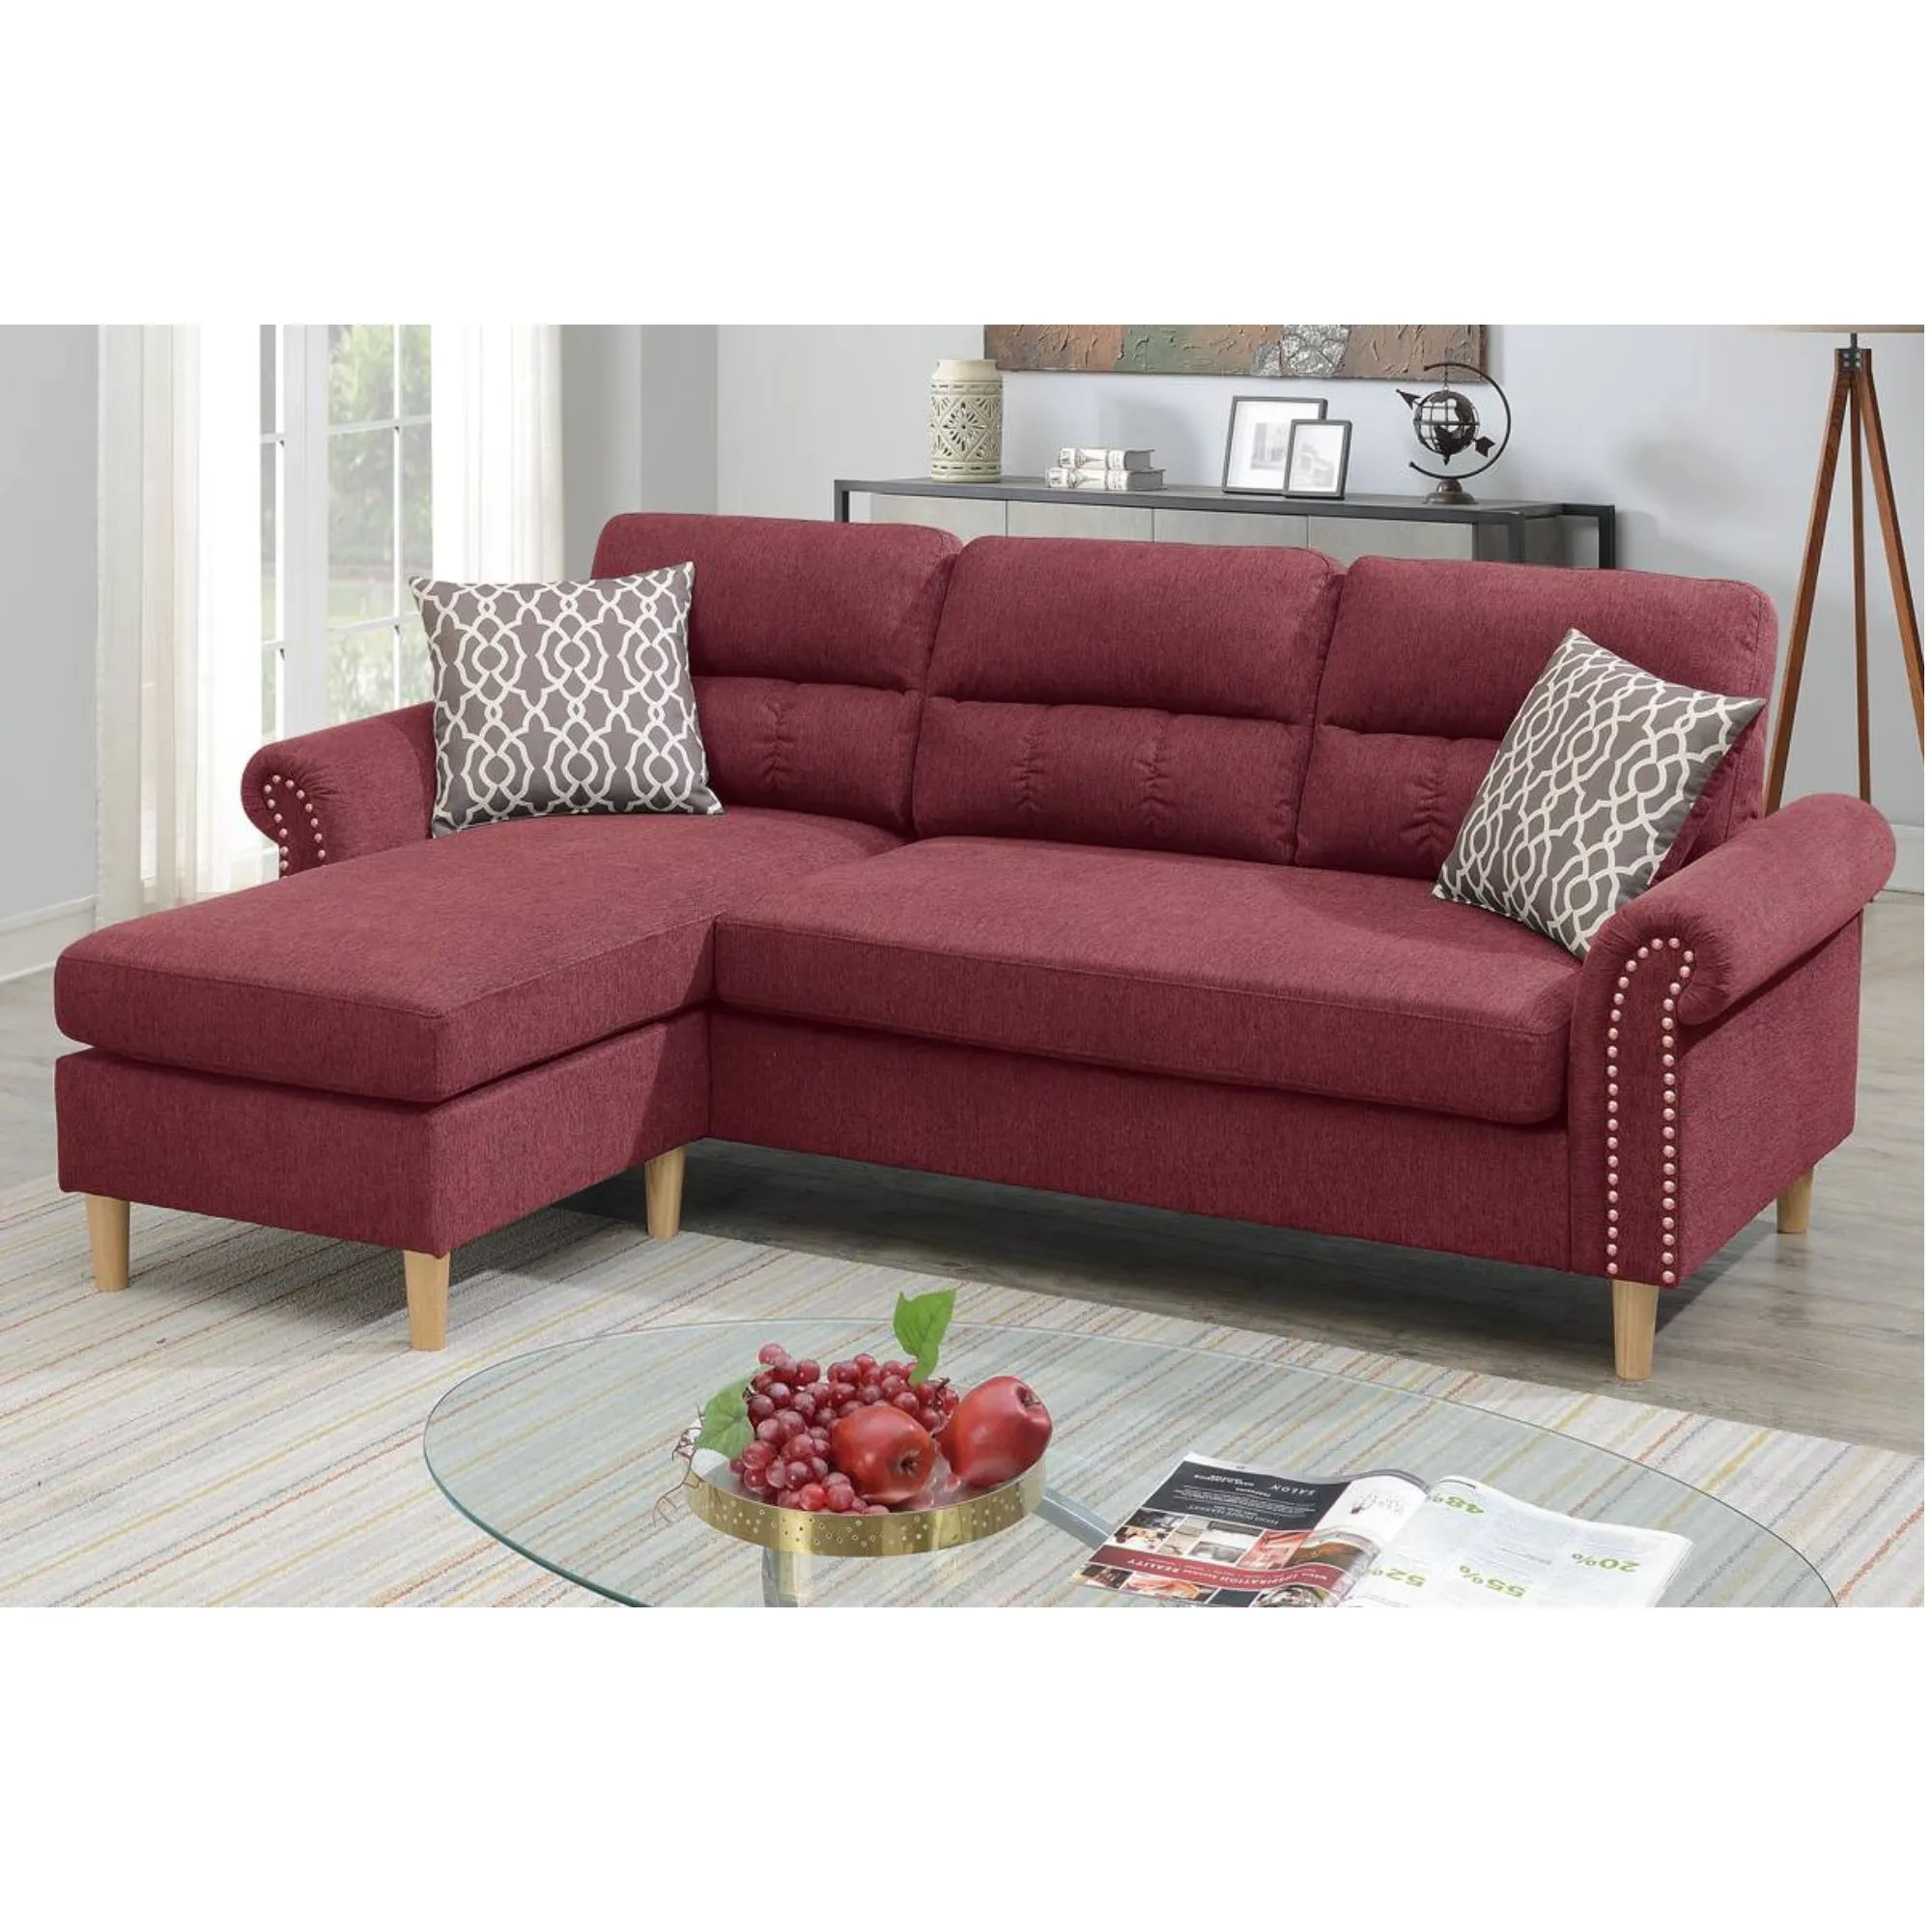 Polyfiber Reversible Sectional Sofa Set with Chaise Pillows Plush Cushion Couch Nailheads